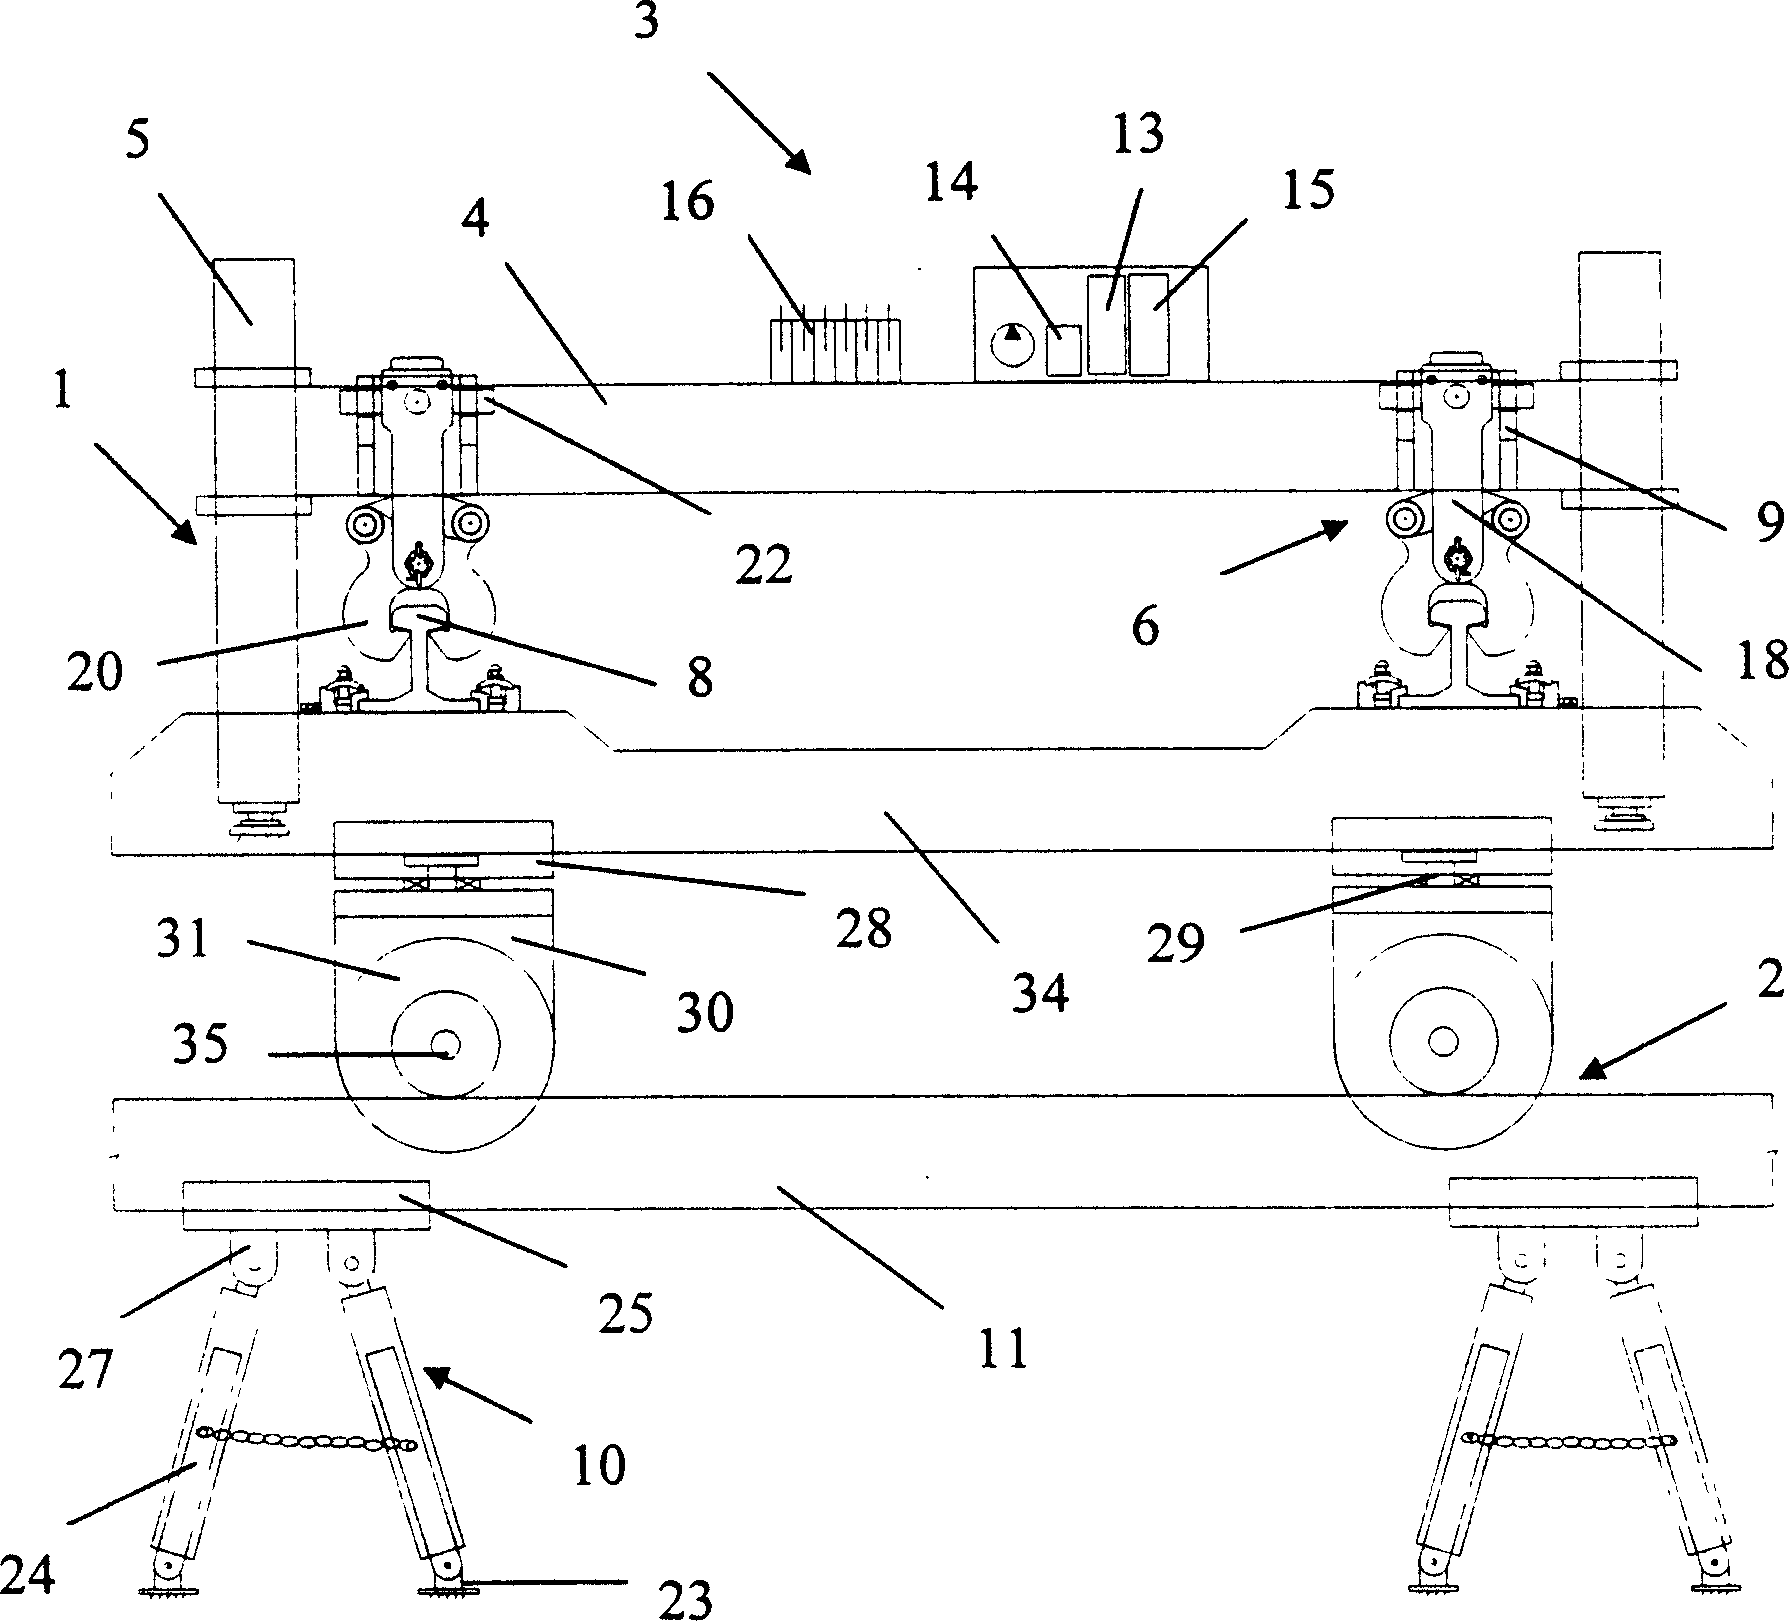 Longitudinal and transverse moving device for switch and rail row